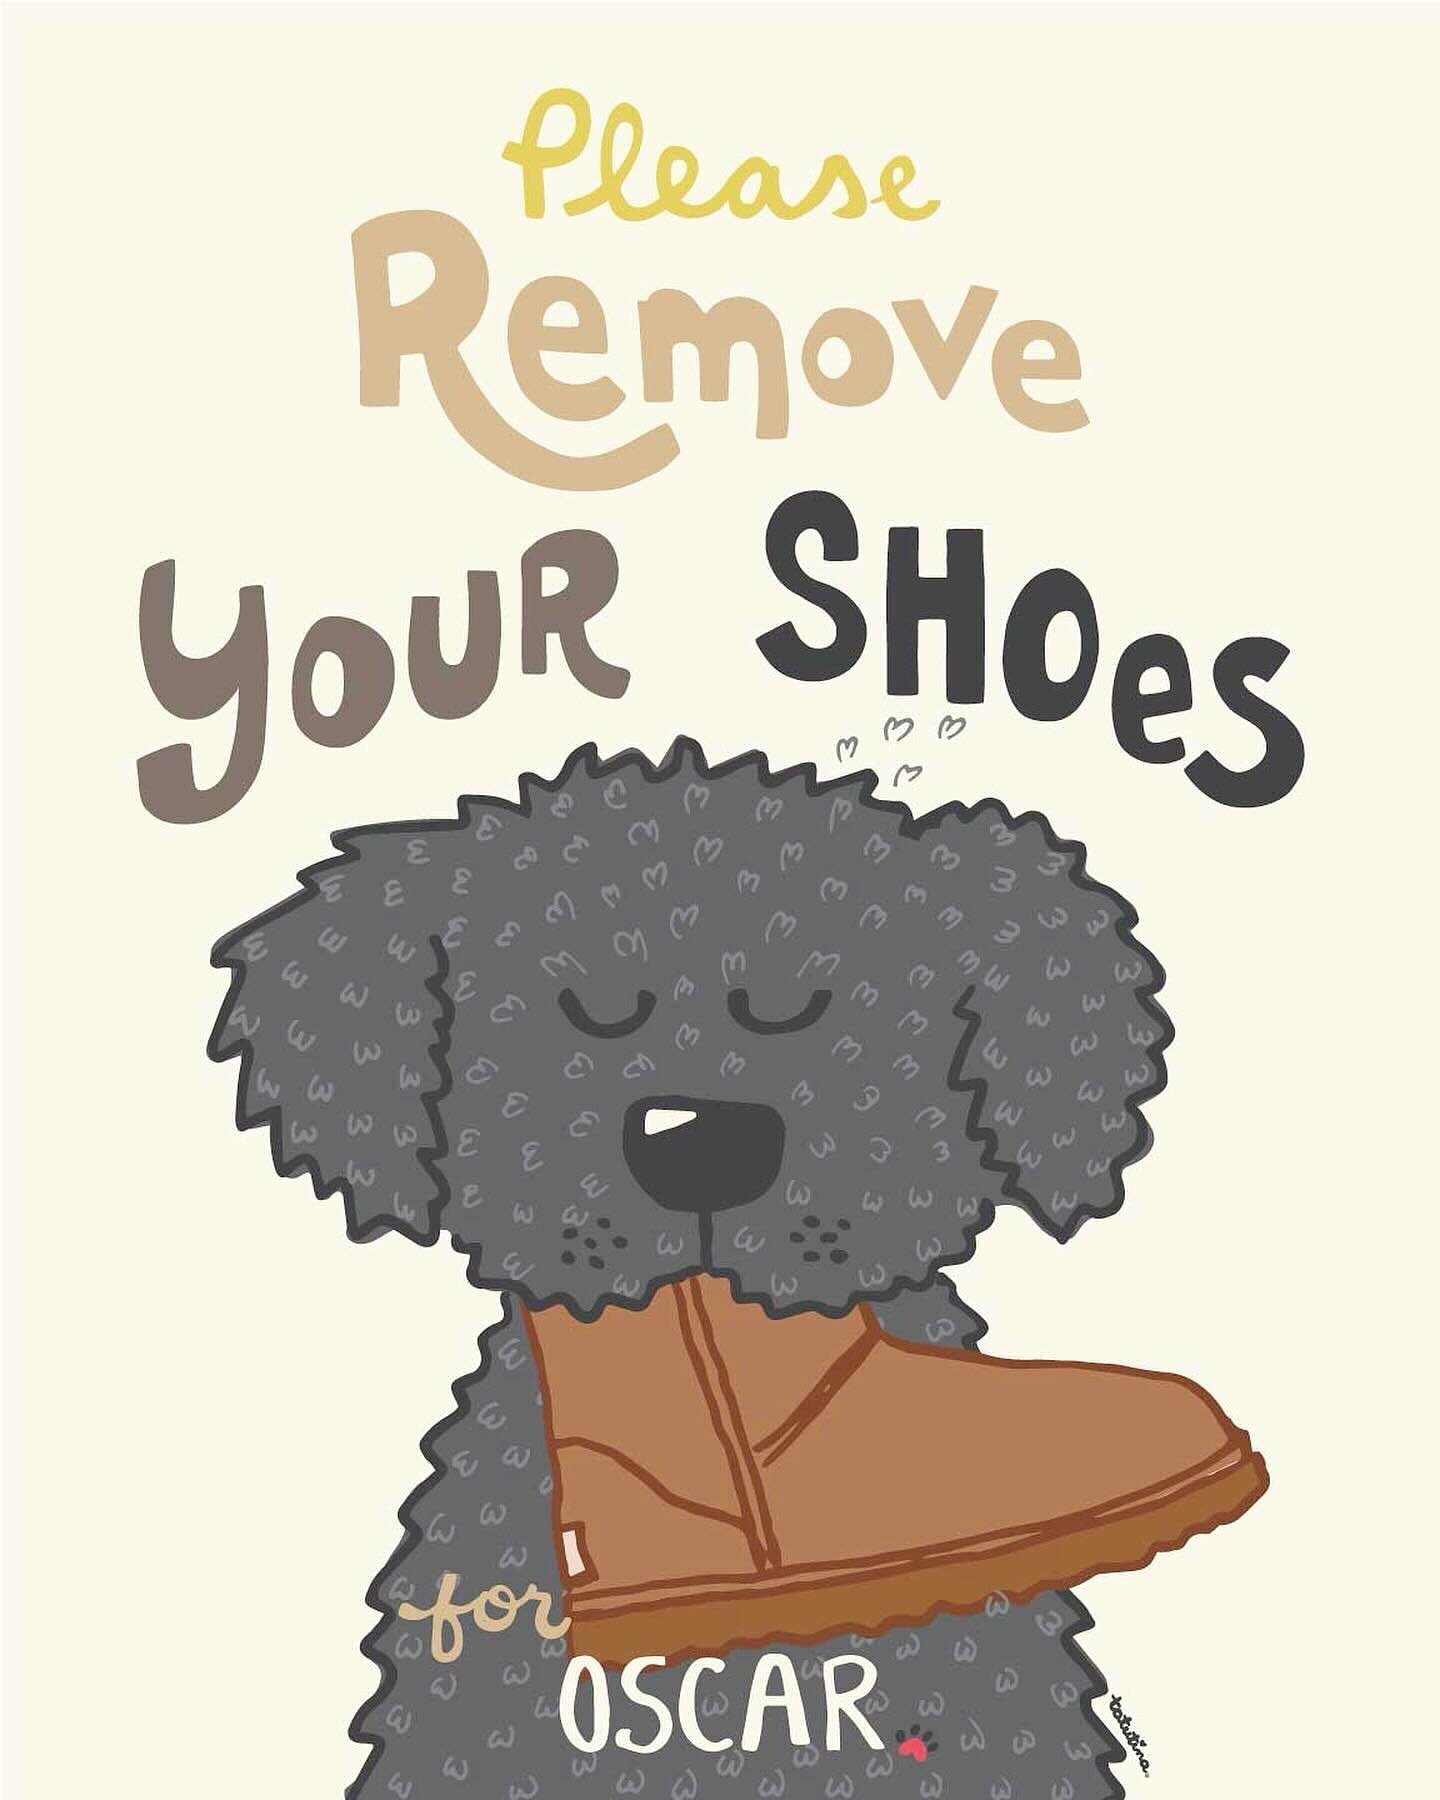 Somehow it&rsquo;s still Ugg season here in RI 🥶 
Please Remove Your Shoes for the dog 🐕&zwj;🦺🥾 
These personalized entryway prints available in 8x10 &amp; 16x20. 
#goldendoodleart #blackdoodlesofinstagram #ugglovers #entrywaymakeover #tatutina